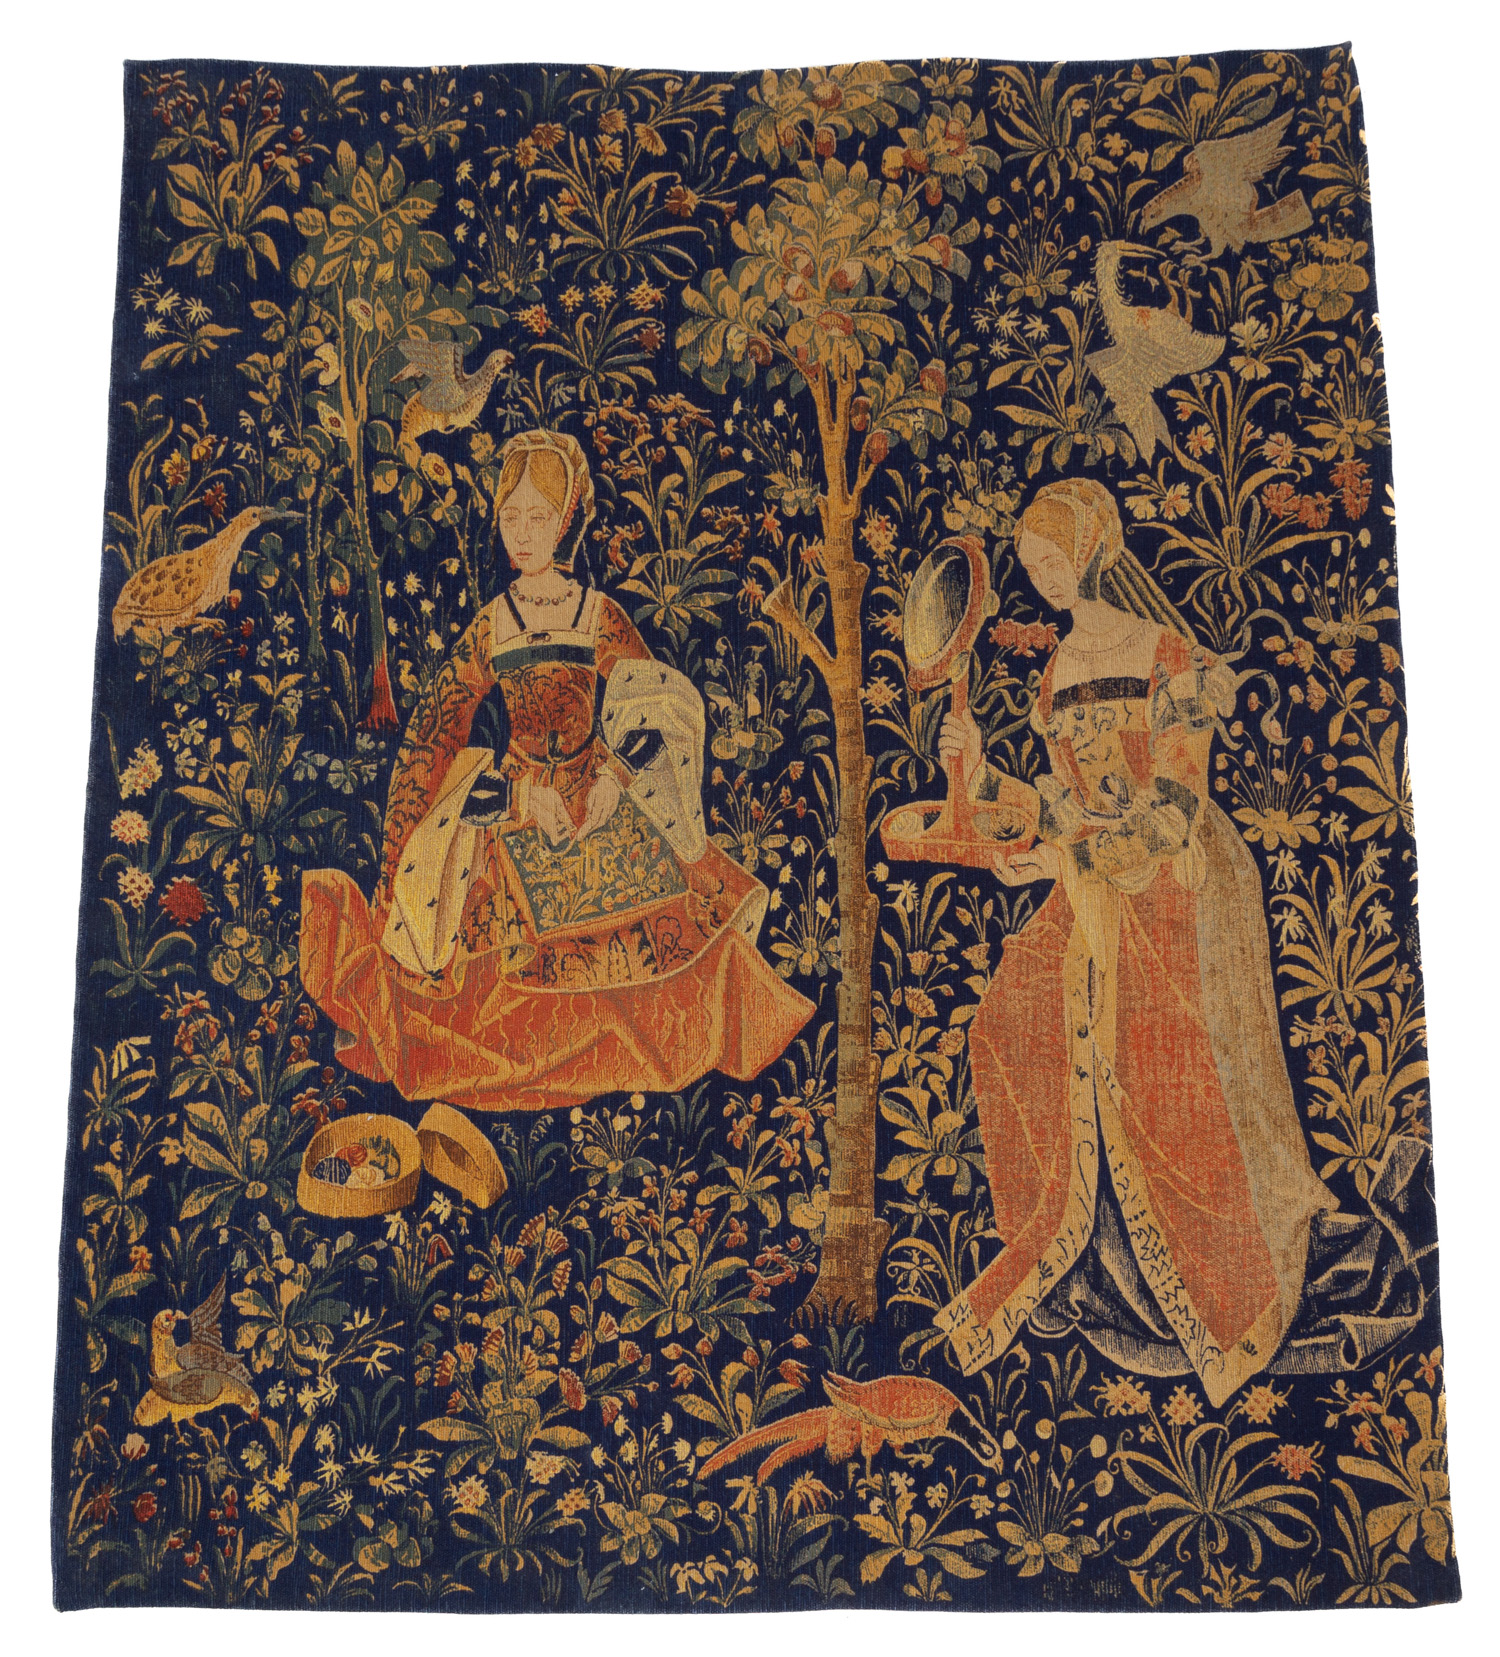 MEDIEVAL STYLE TAPESTRY Screen printed